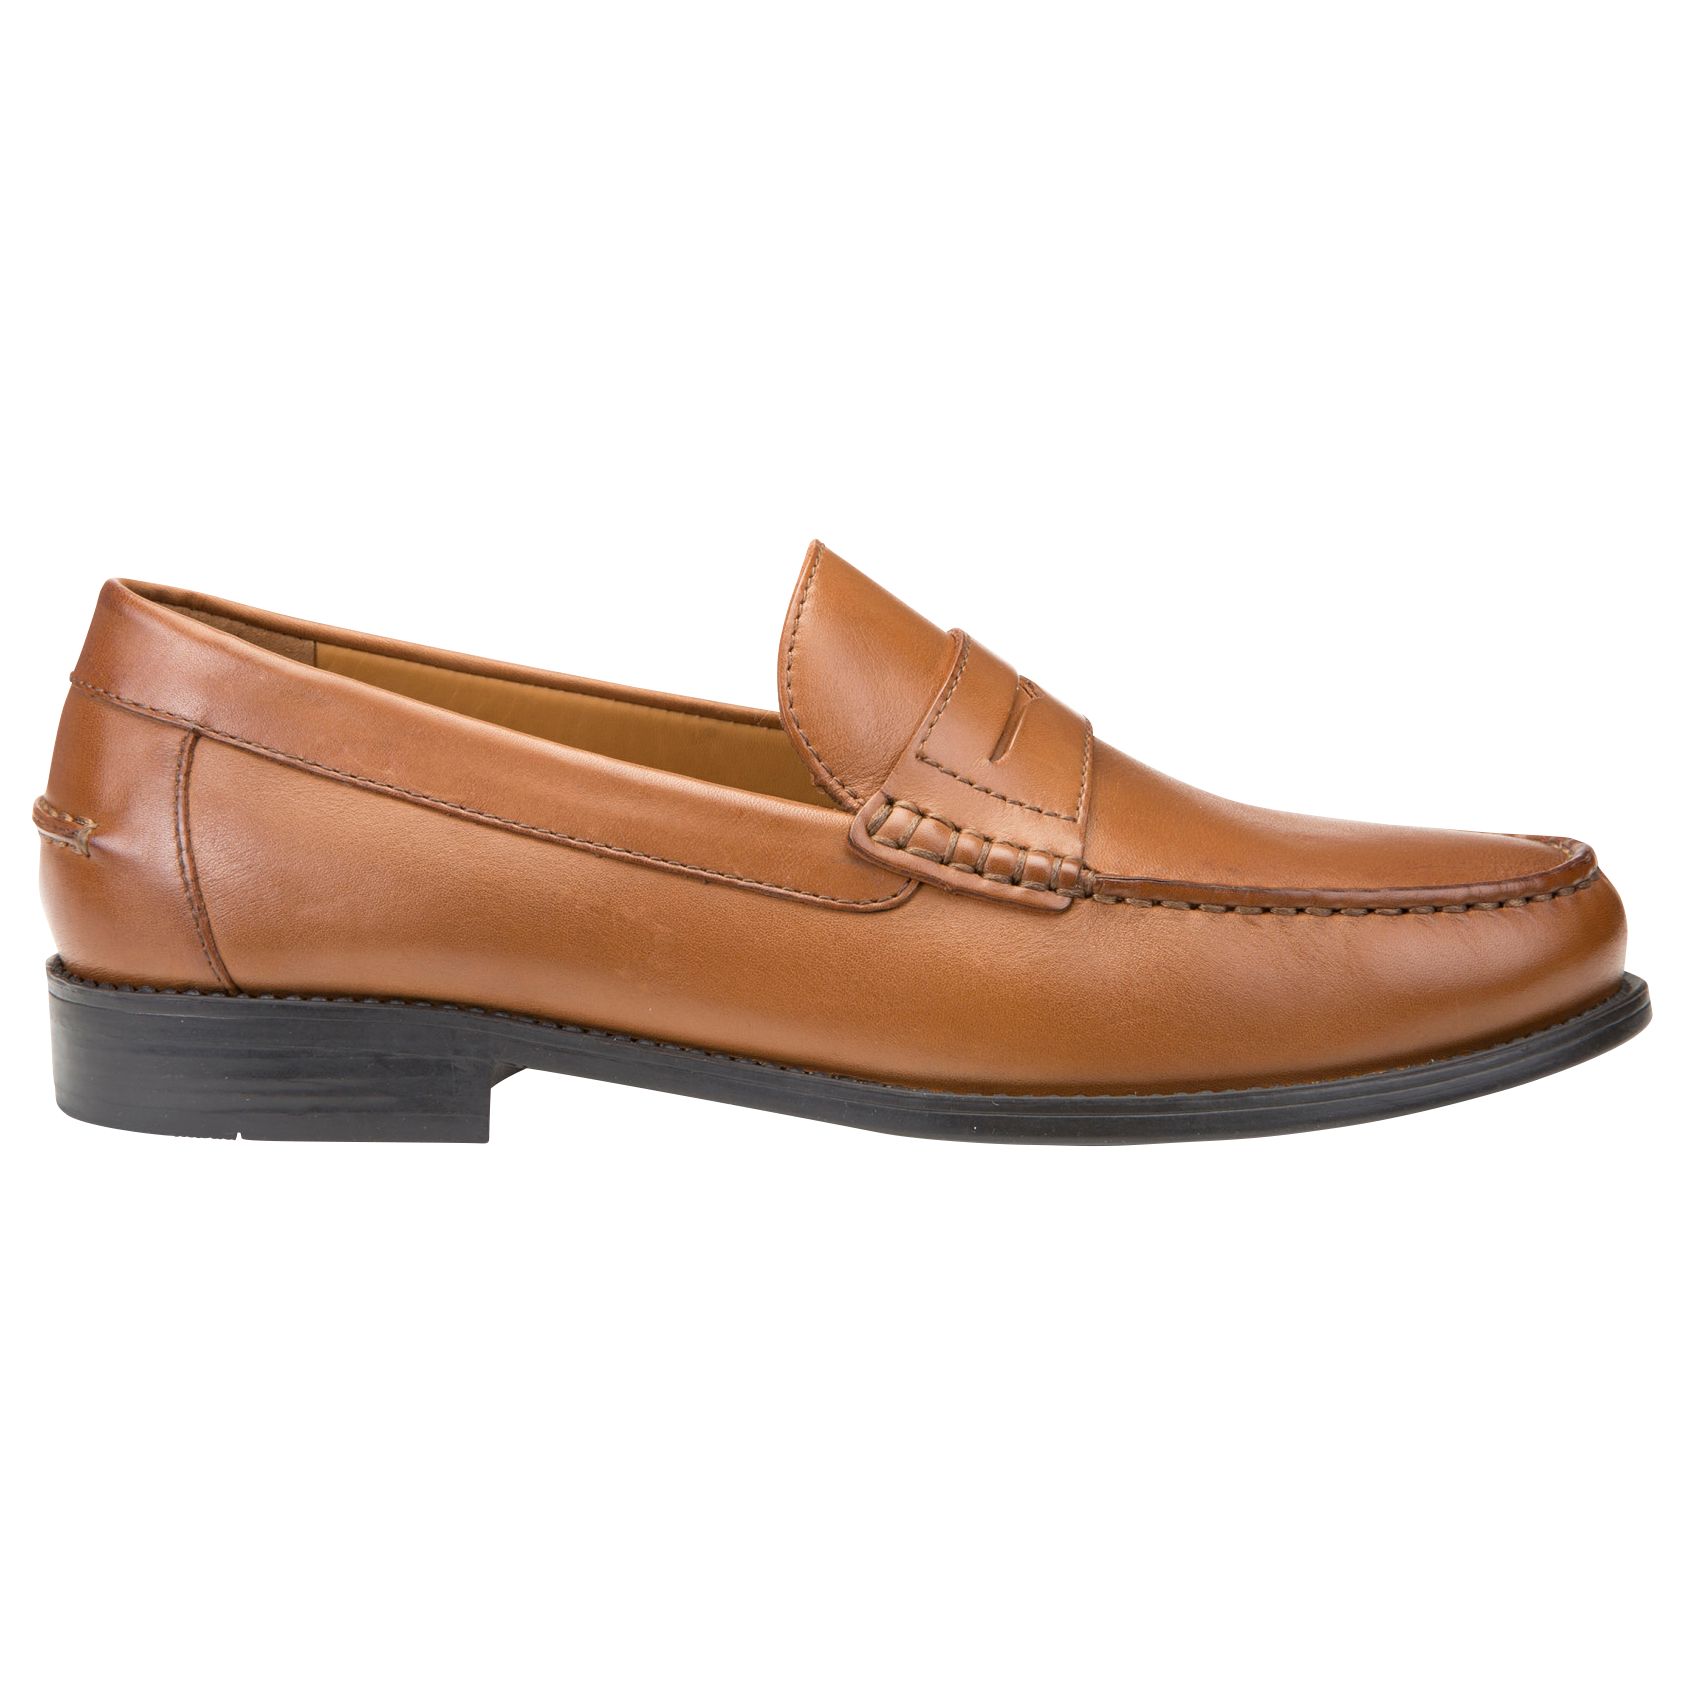 Geox New Damon Moccasins Shoes at John Lewis & Partners